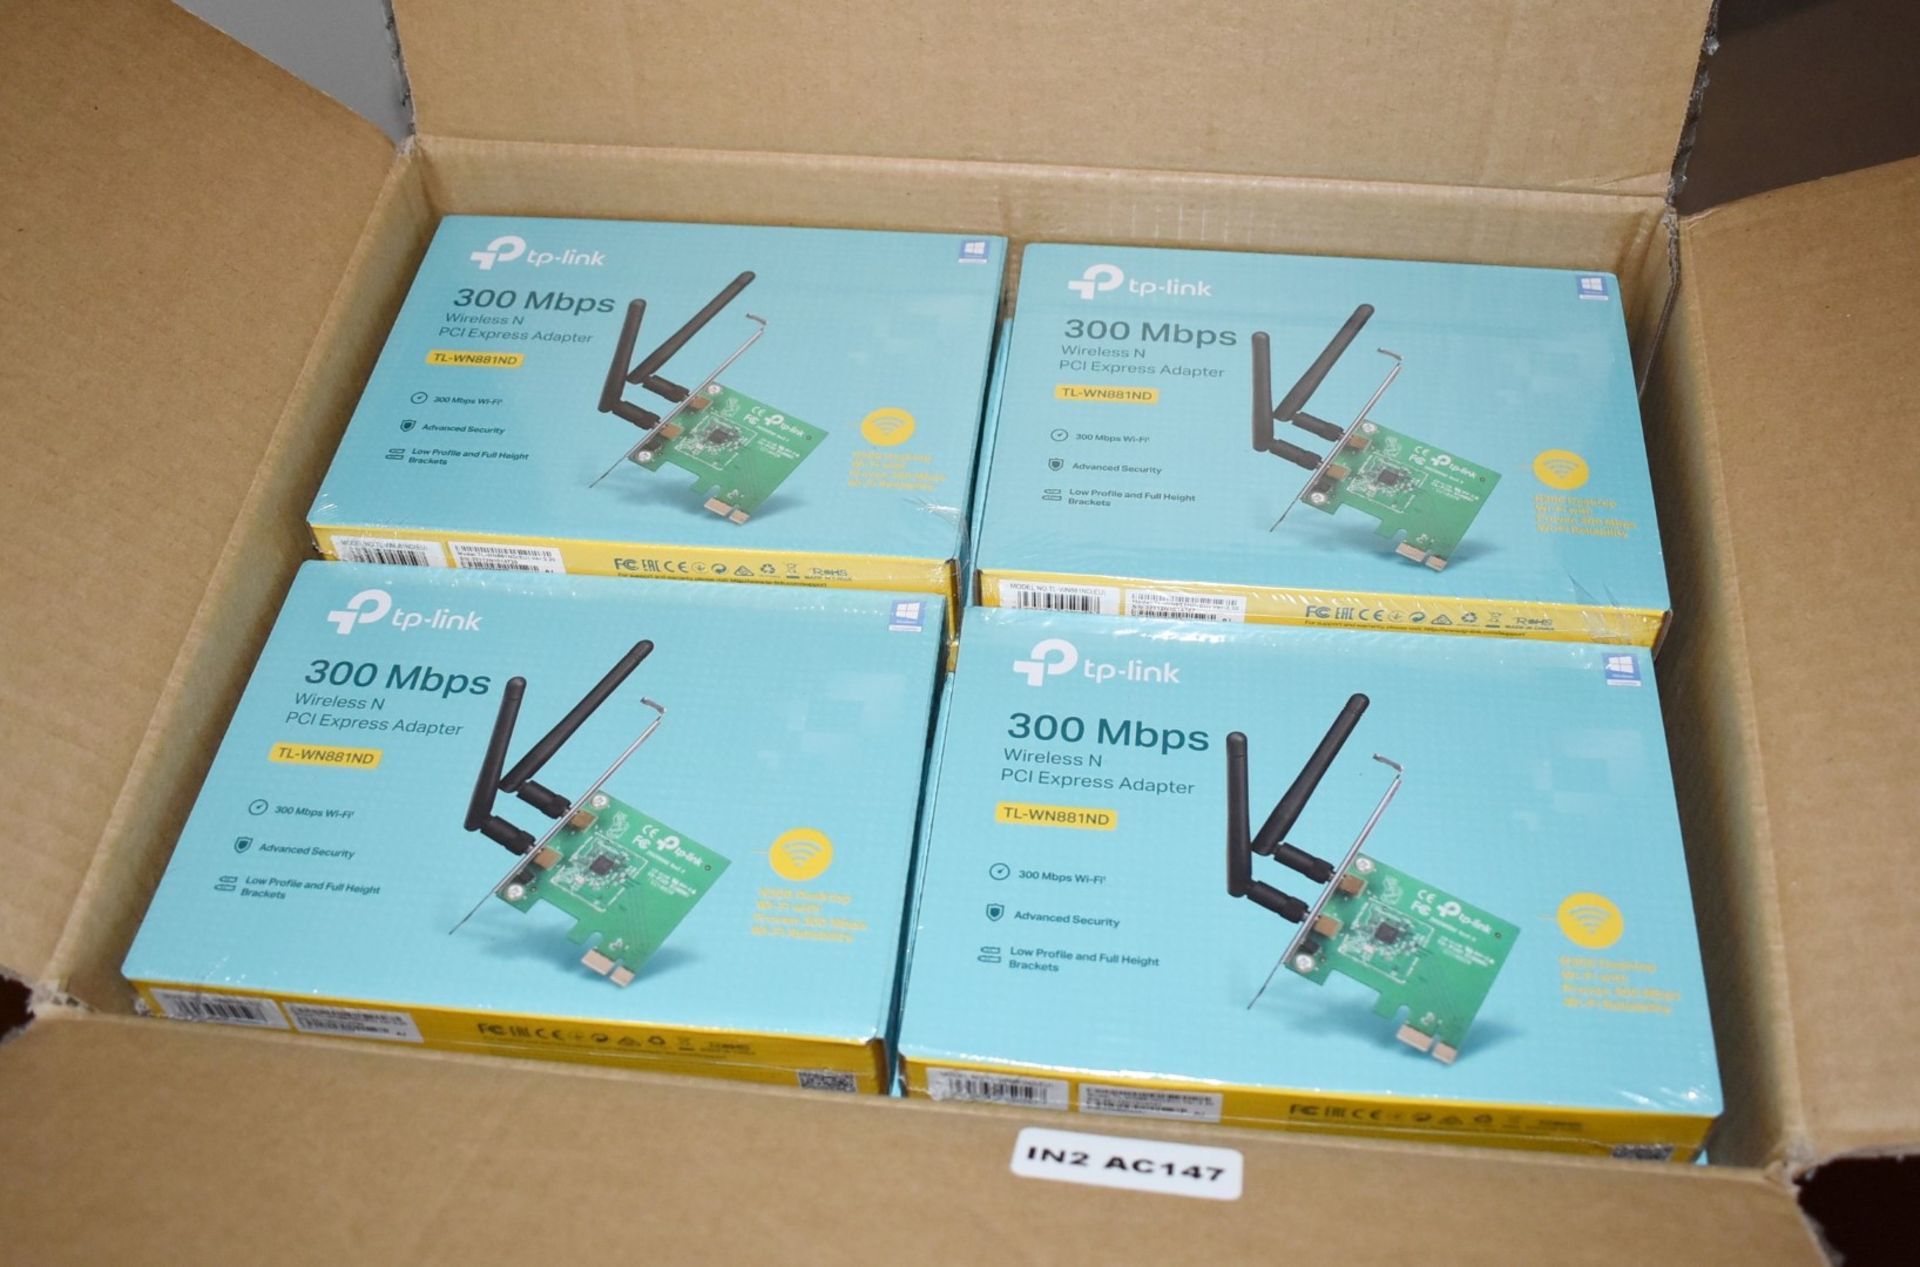 10 x TP-Link TL-WN881ND 300mbps Wireless N Pci Express Adapters - New Boxed Stock - RRP £180